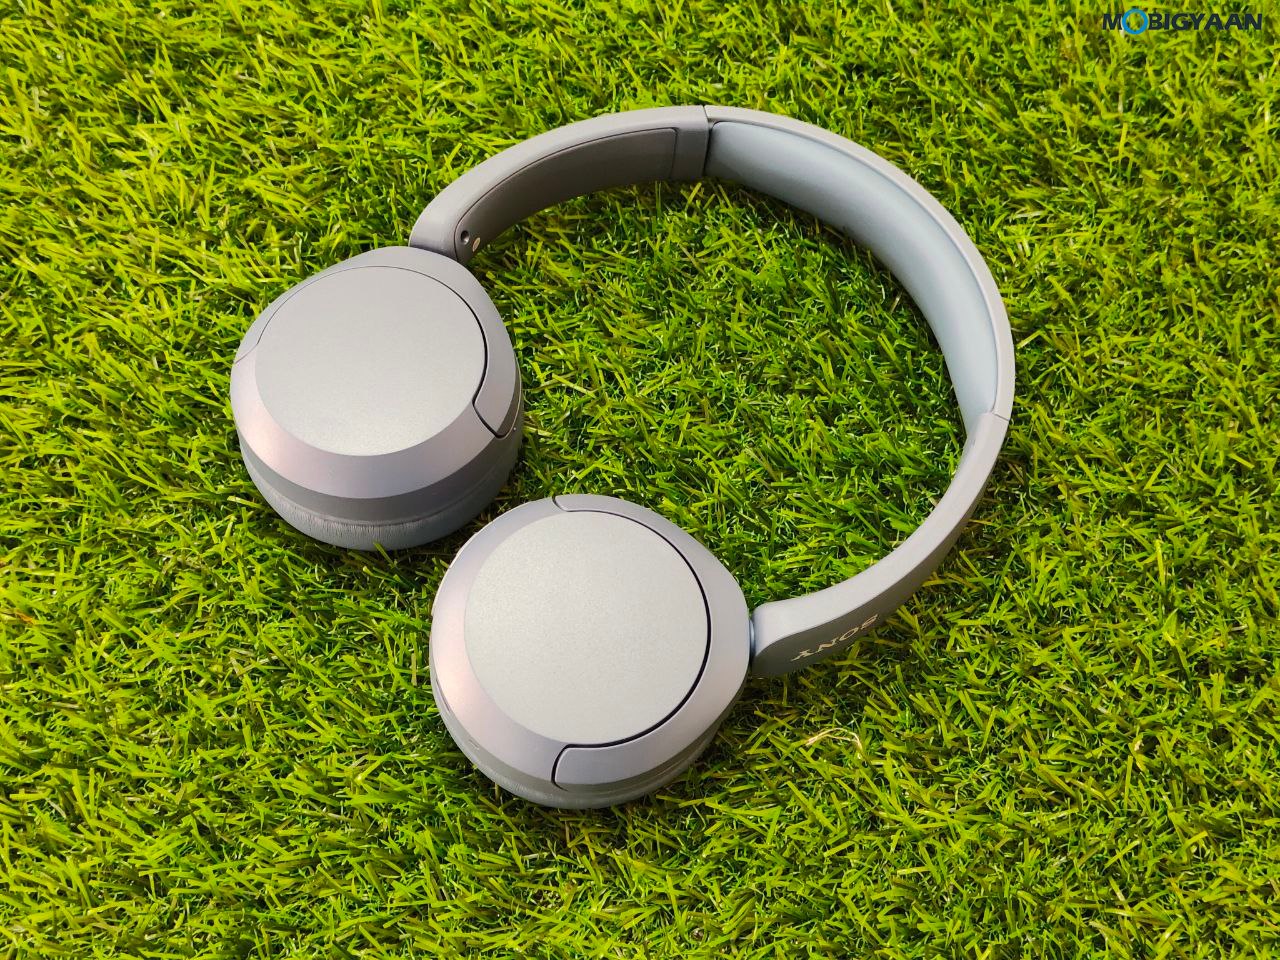 Sony WH-CH520 Wireless Headphones Review